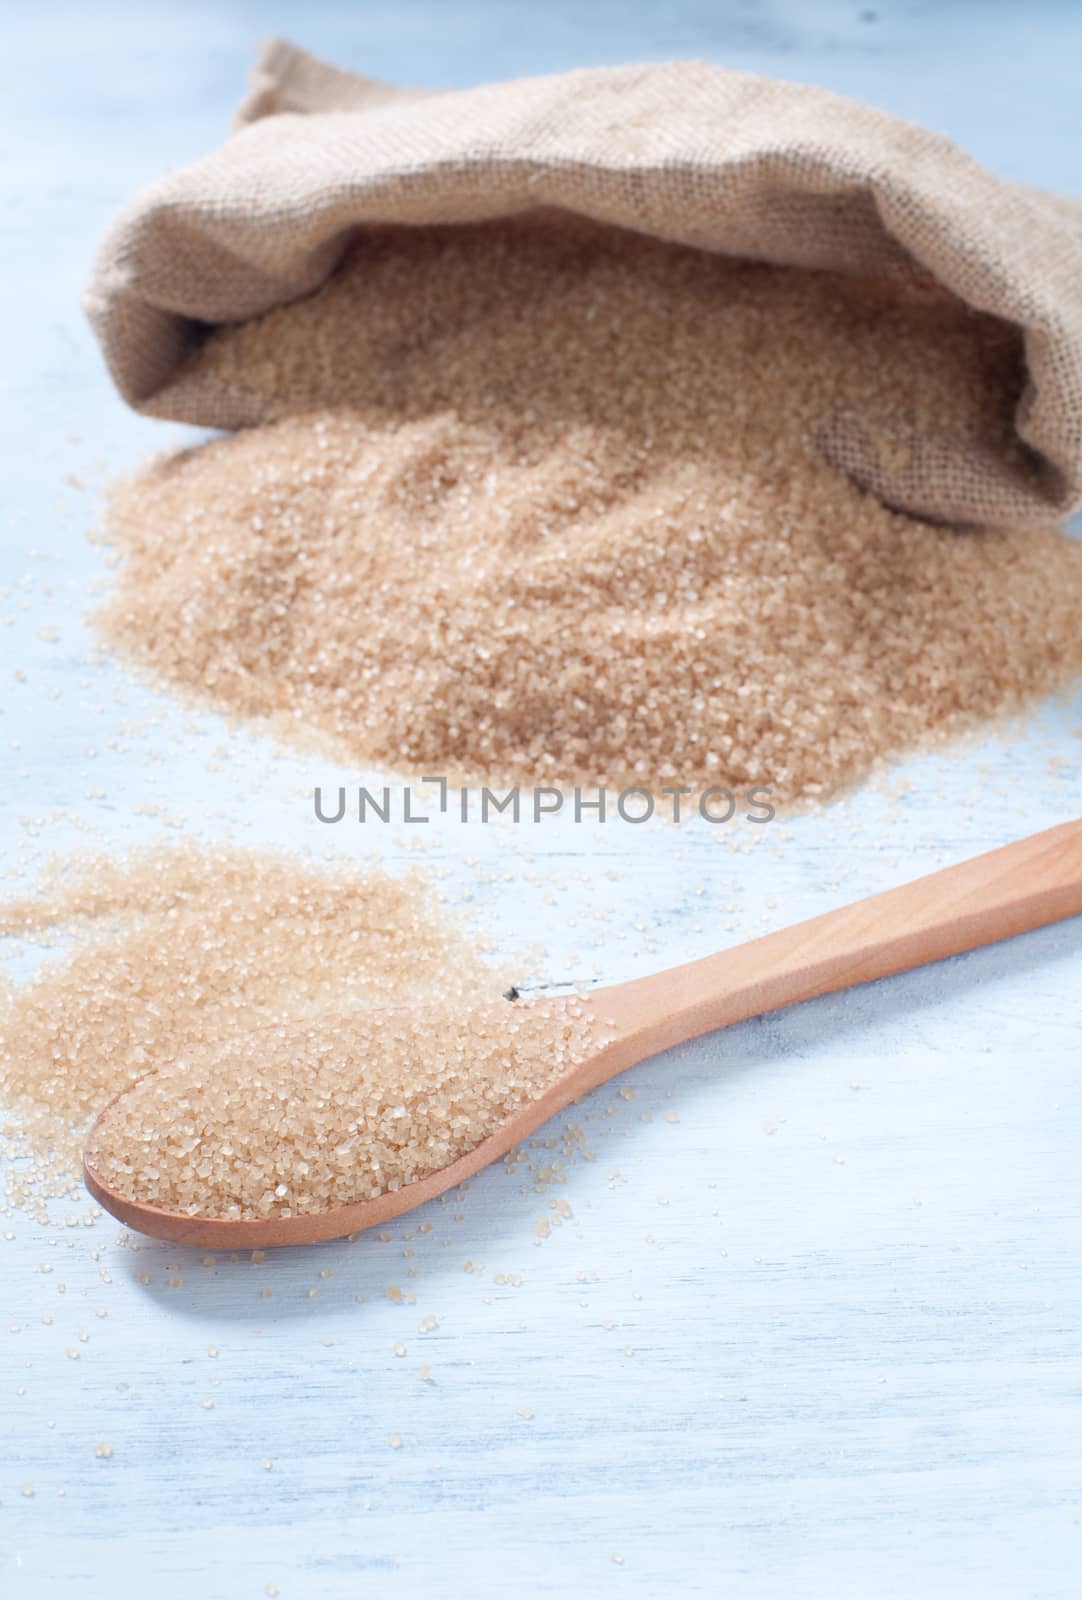 Different types of sugar: brown, white and refined sugar